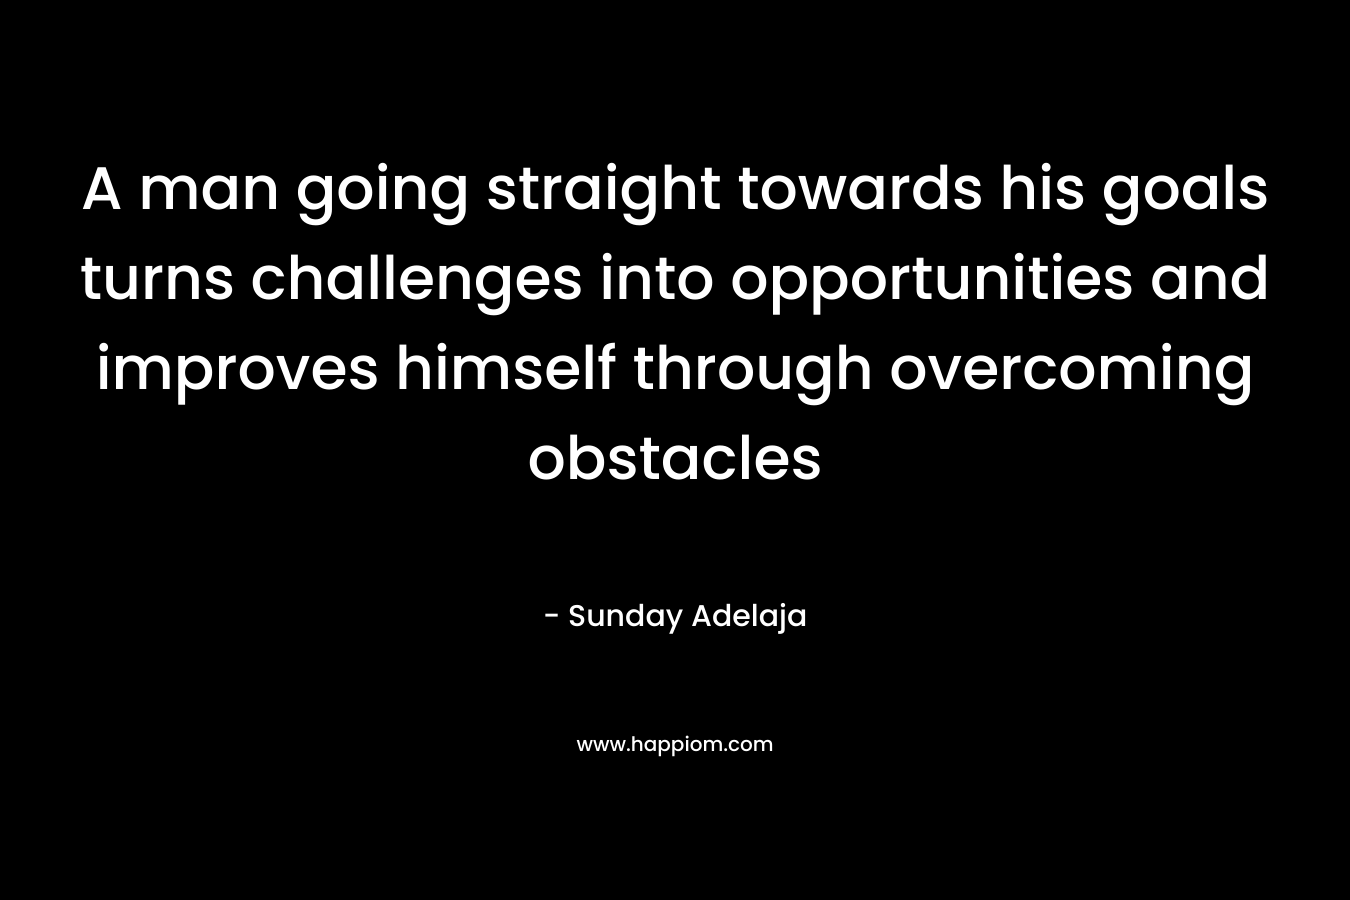 A man going straight towards his goals turns challenges into opportunities and improves himself through overcoming obstacles